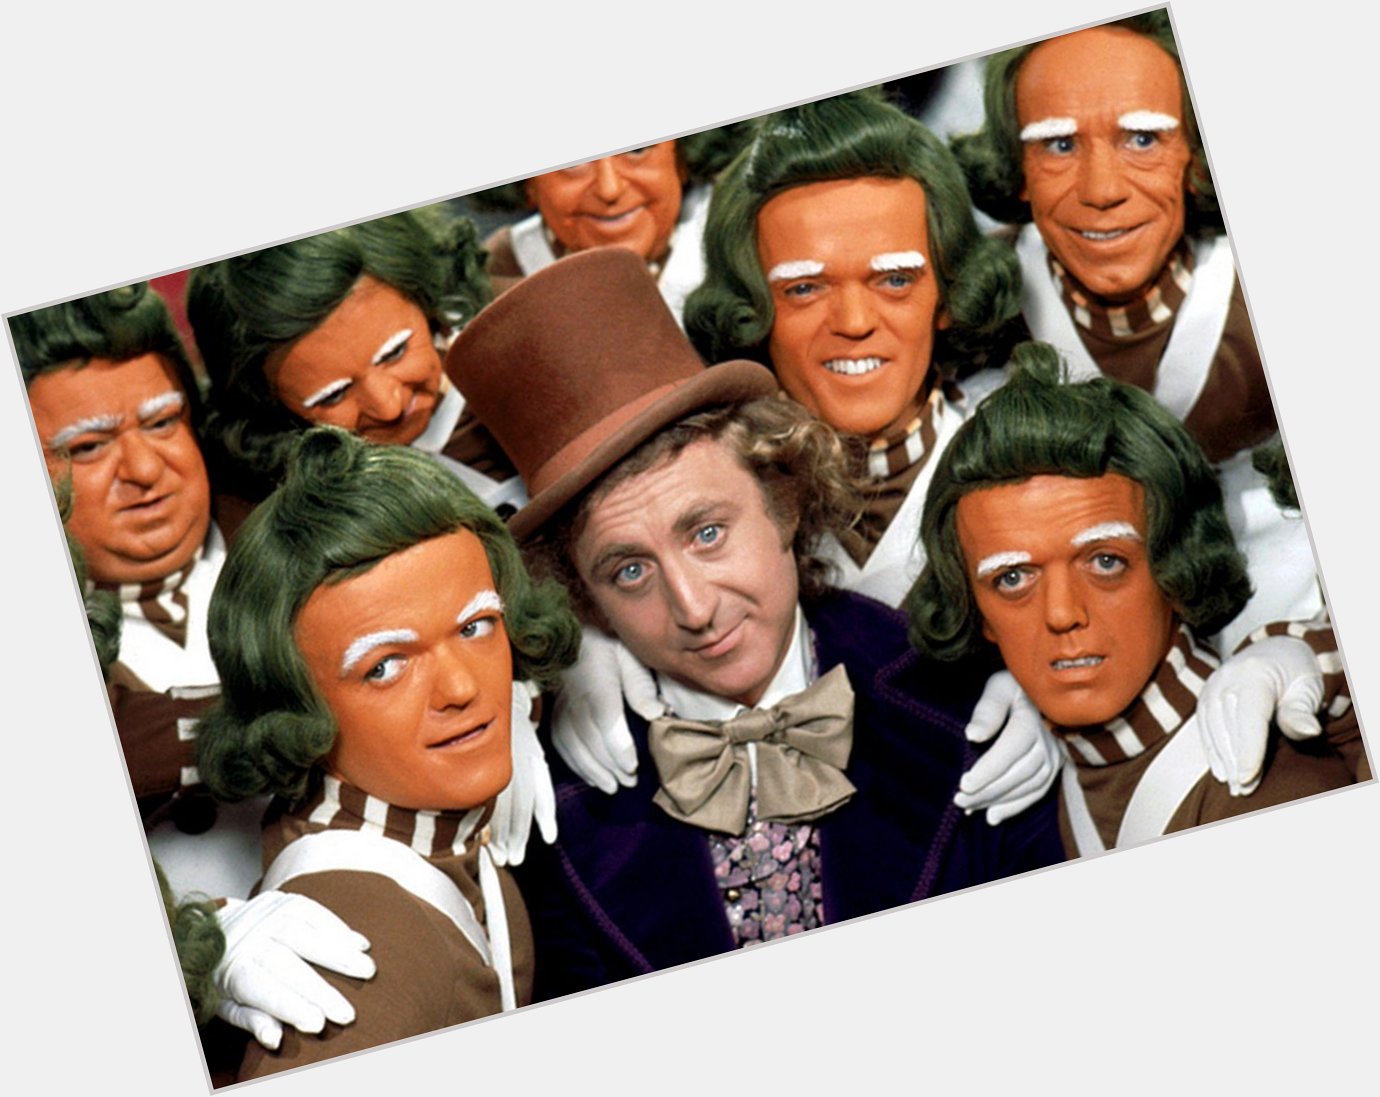 Happy Birthday Gene Wilder! All fans of Willy Wonka and the Chocolate Factory will love this:  